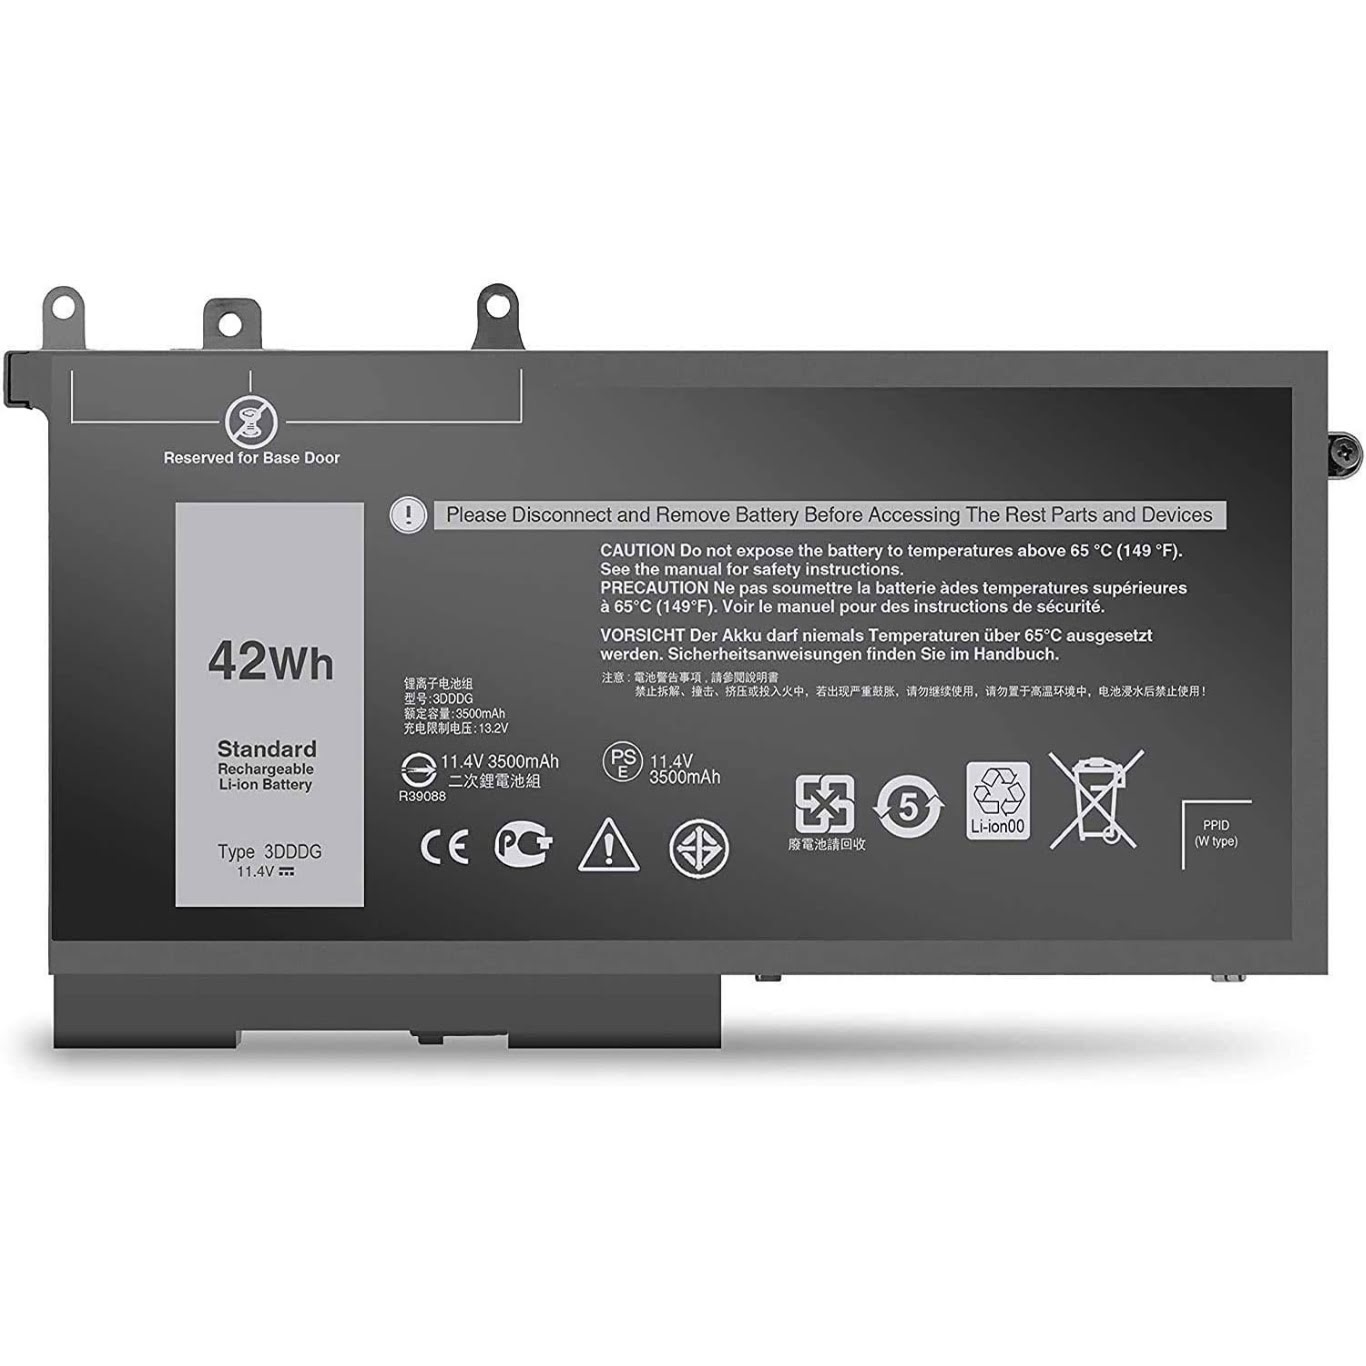 03VC9Y, 3DDDG replacement Laptop Battery for Dell Latitude E5280, Latitude E5480 Series, 11.4v, 42wh